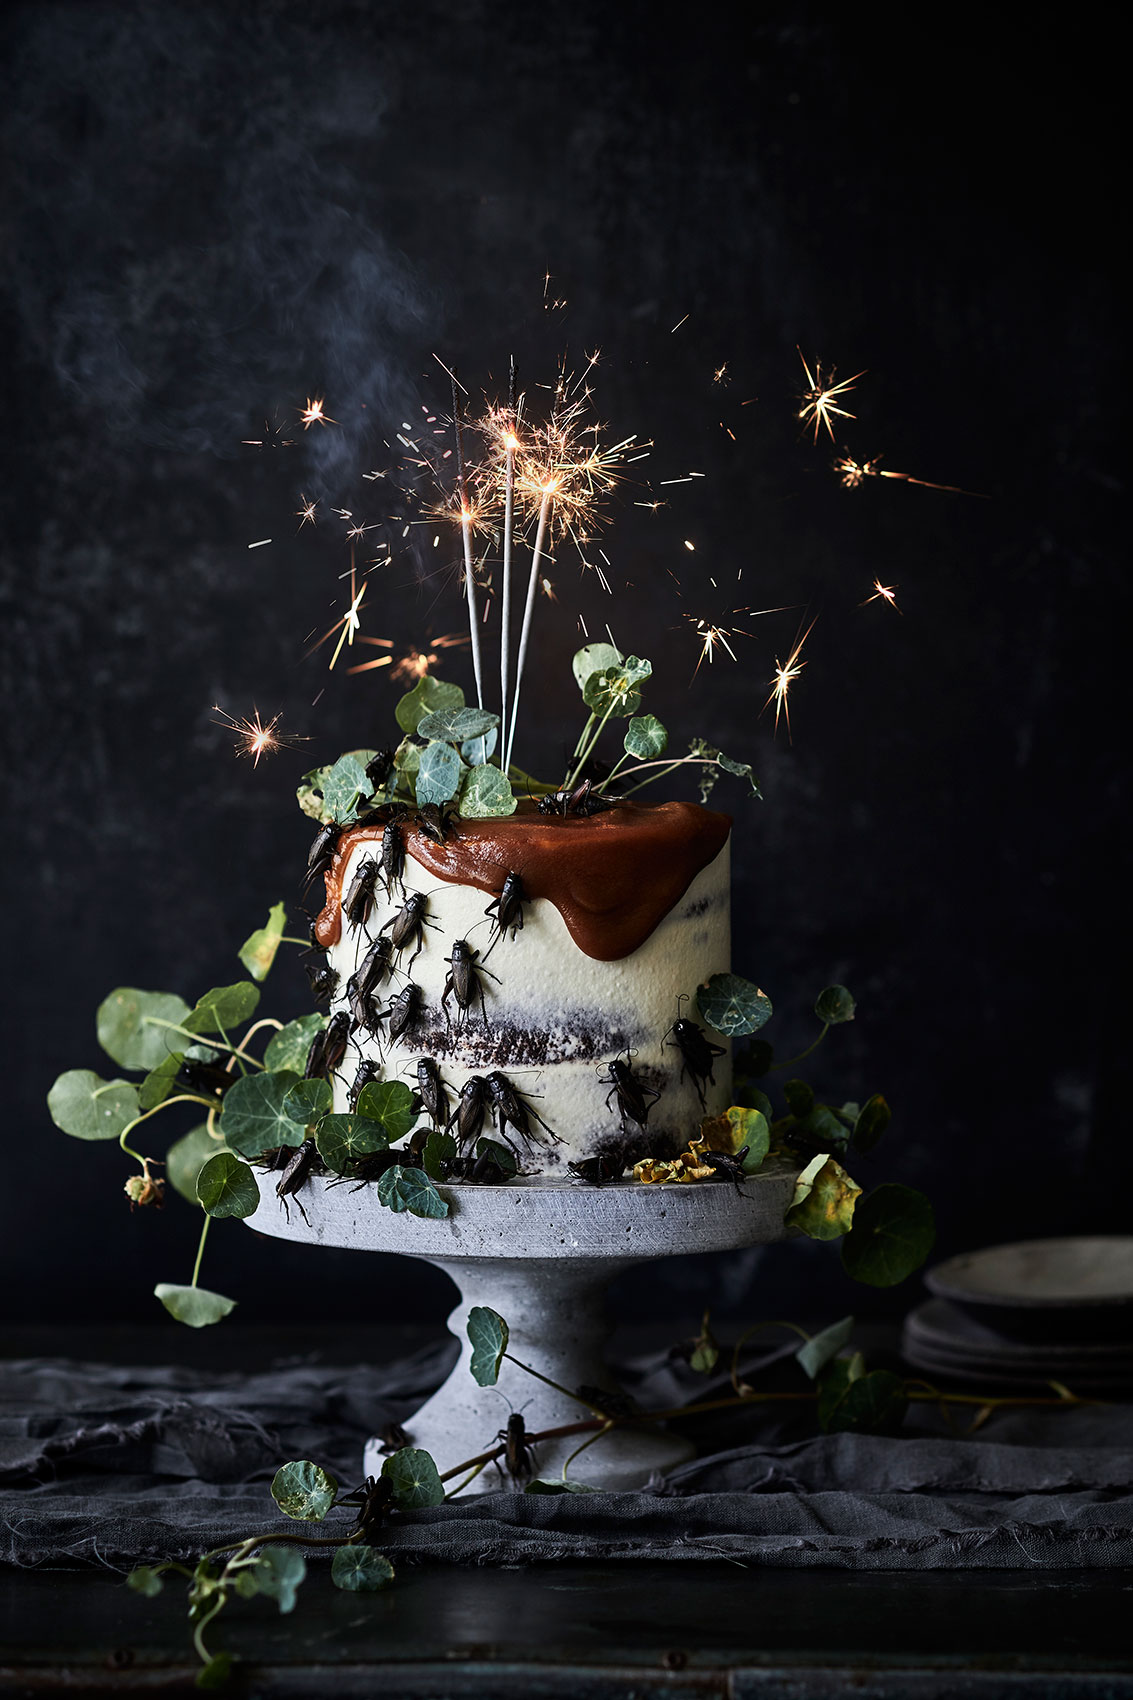 The Bug Project • Cricket Cake with Sparklers • Advertising & Editorial Food Photography